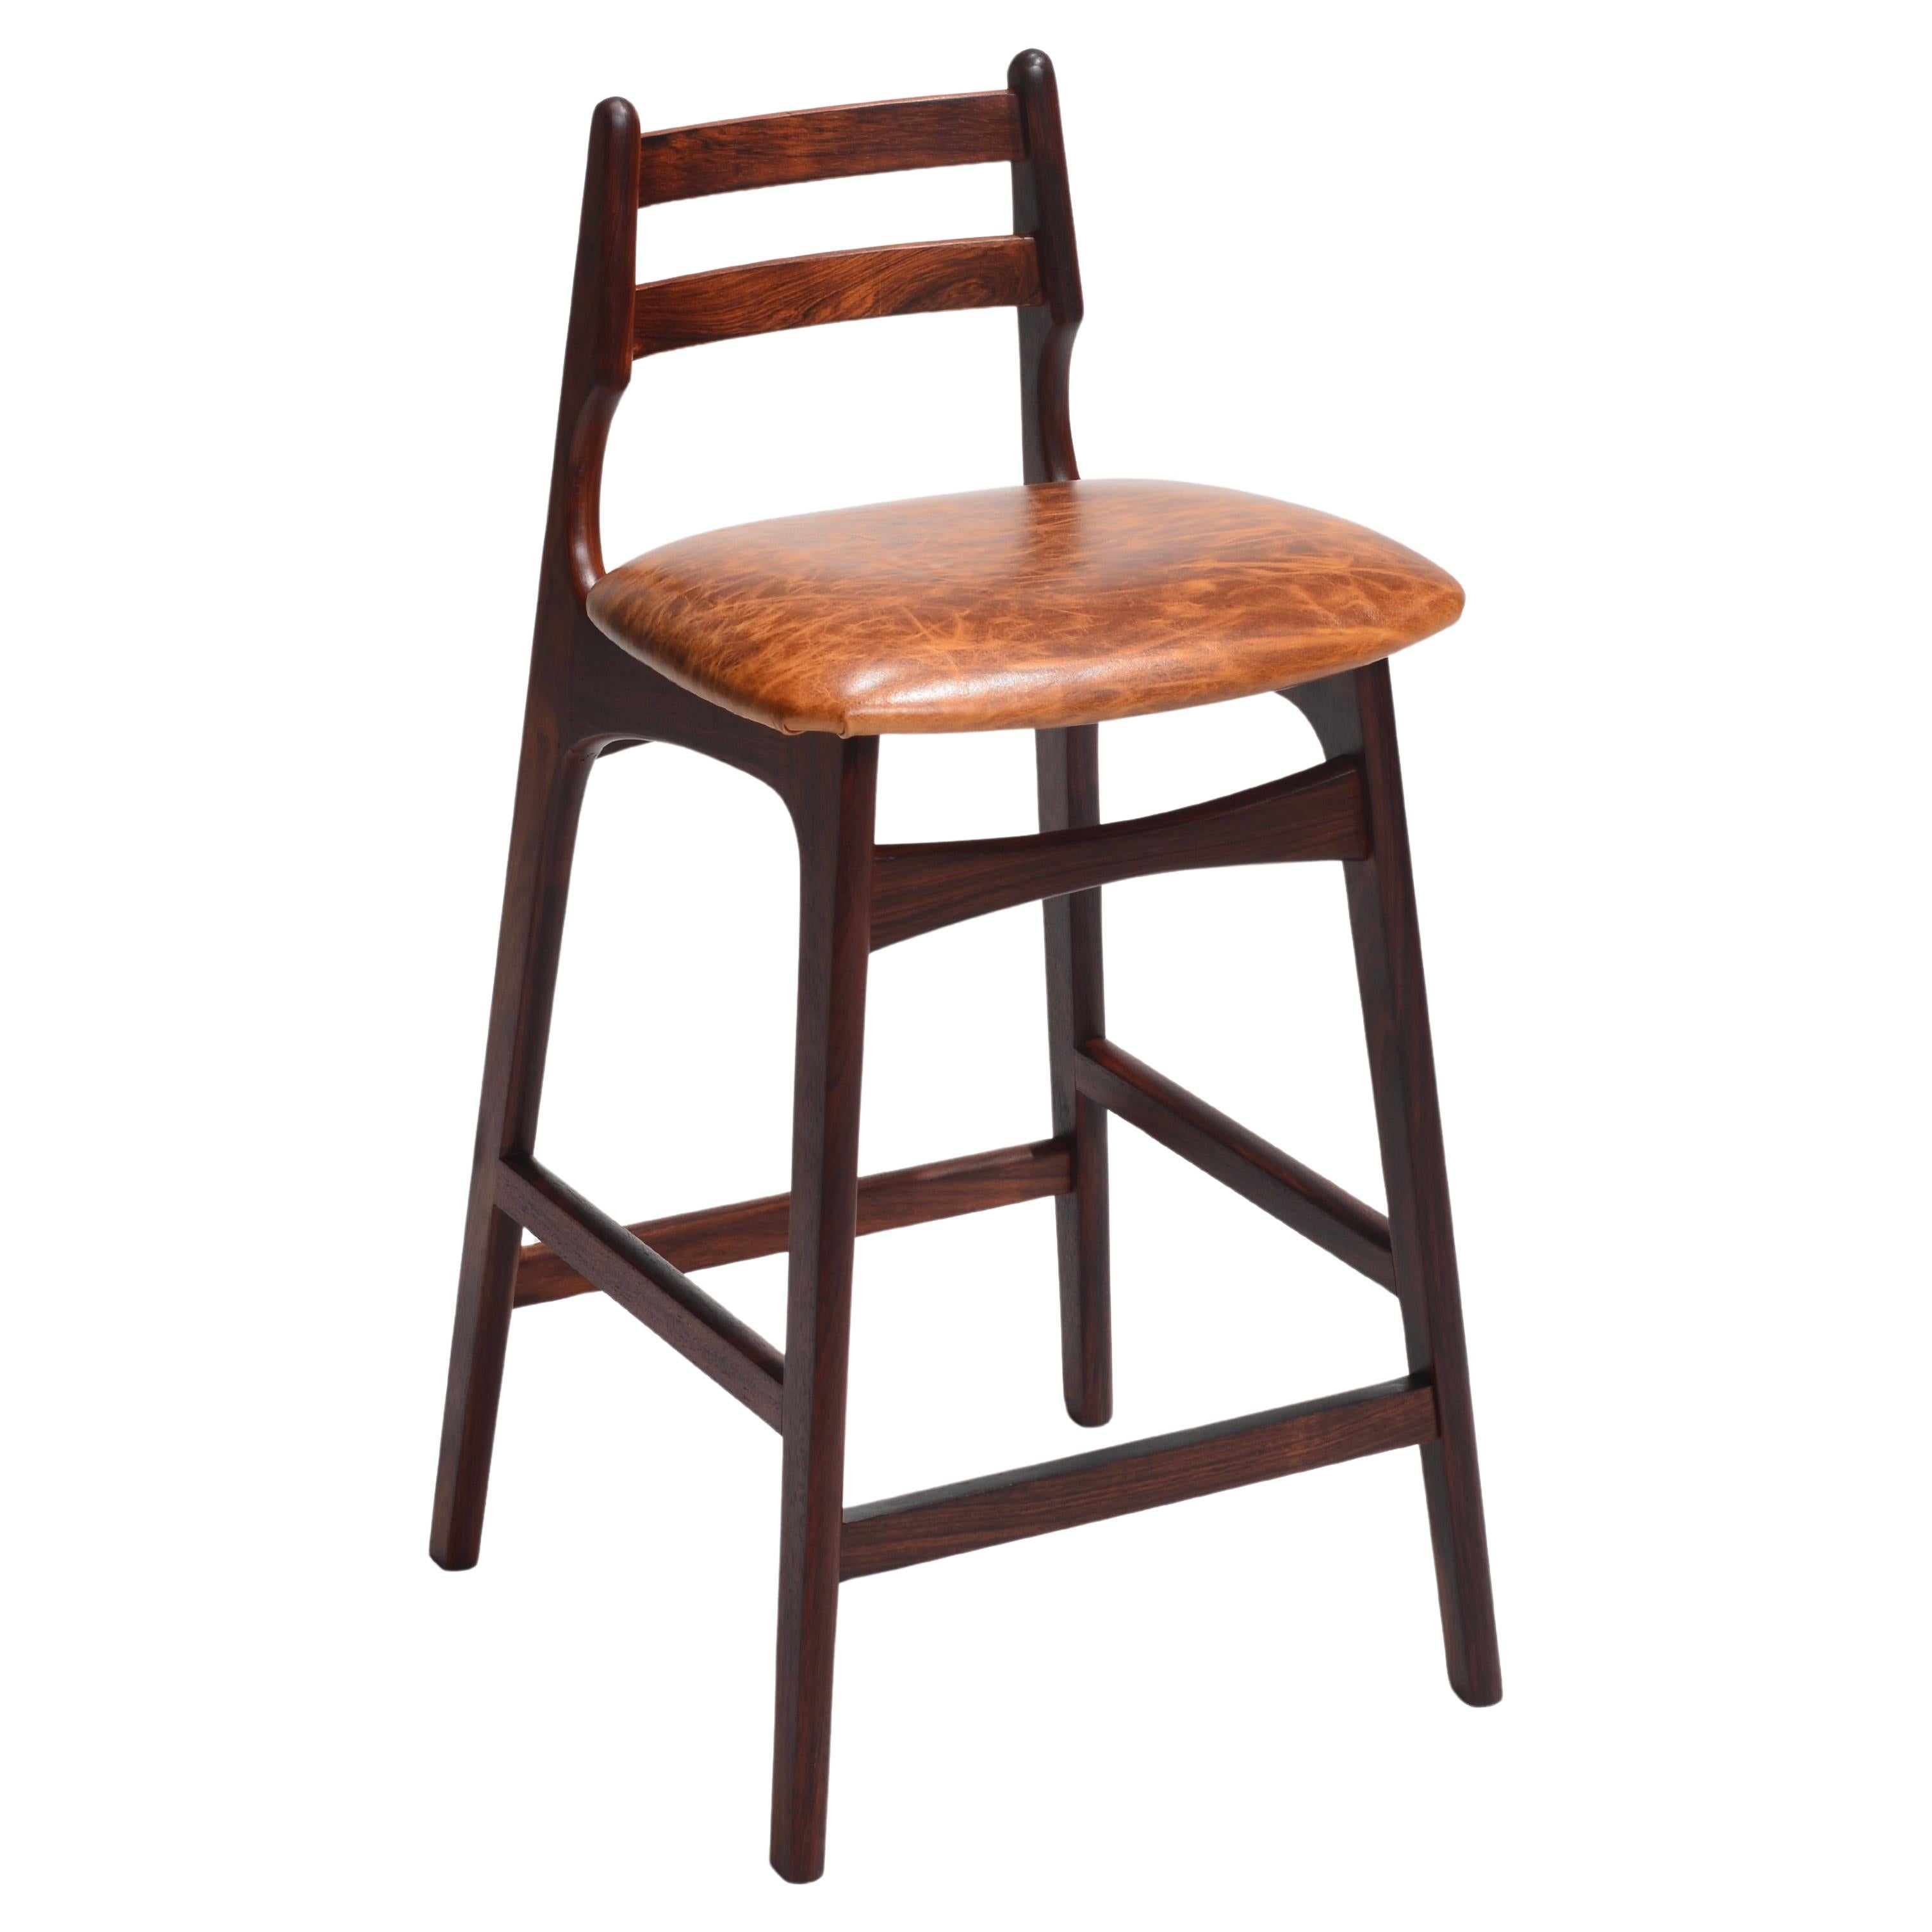 The Mid-Century Danish Modern Rosewood counter Stool by Erik Buck, embodies the quintessential elegance and timeless appeal of mid-century Scandinavian design. Crafted with meticulous attention to detail, this counter stool pays homage to the iconic